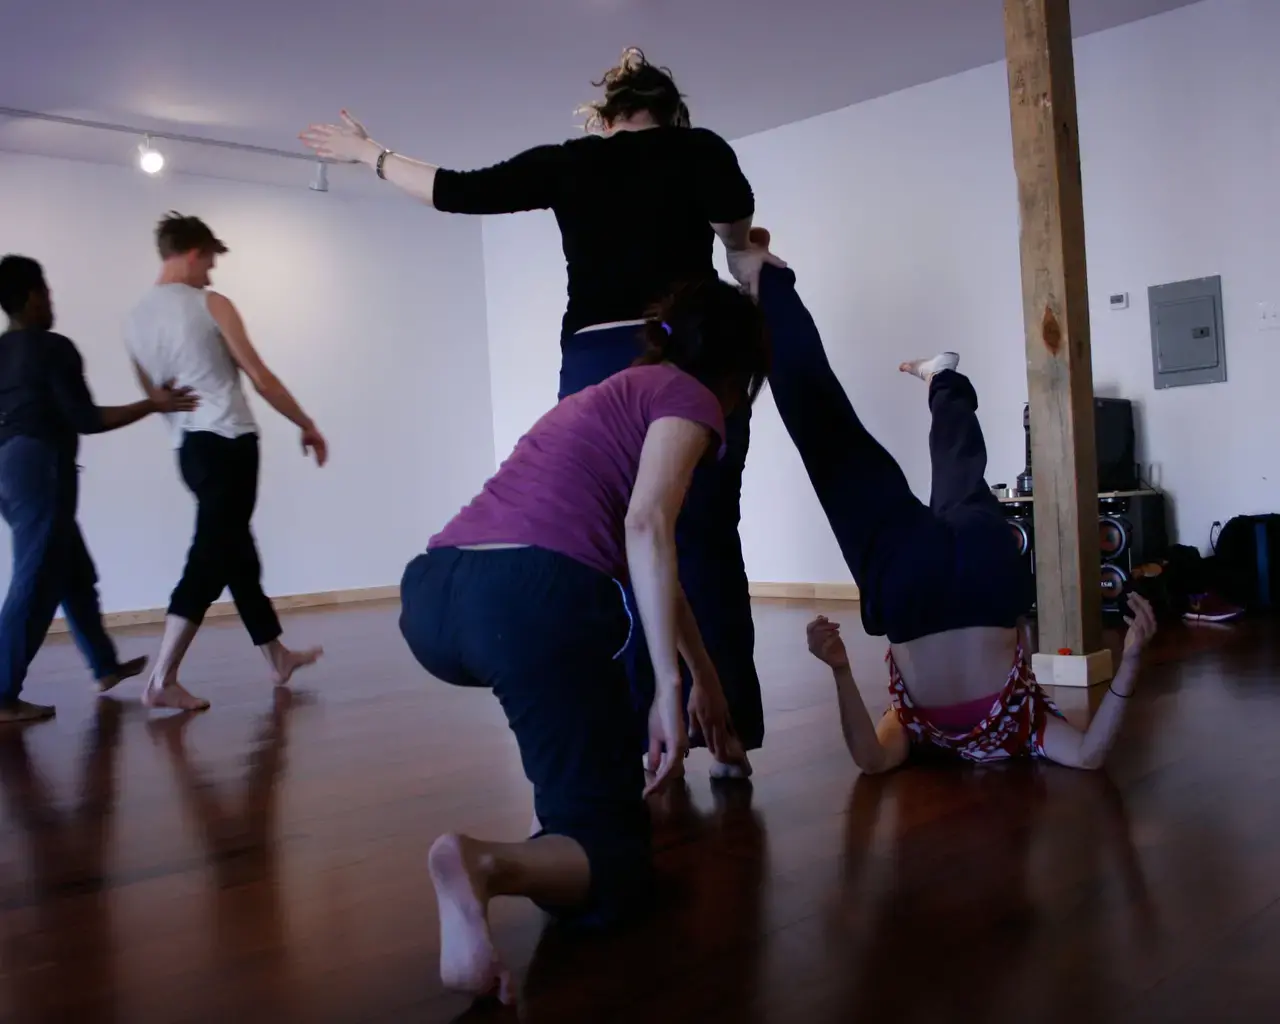 Nichole Canuso Dance Company, physical practice and choreographic investigations. Photo by Nichole Canuso